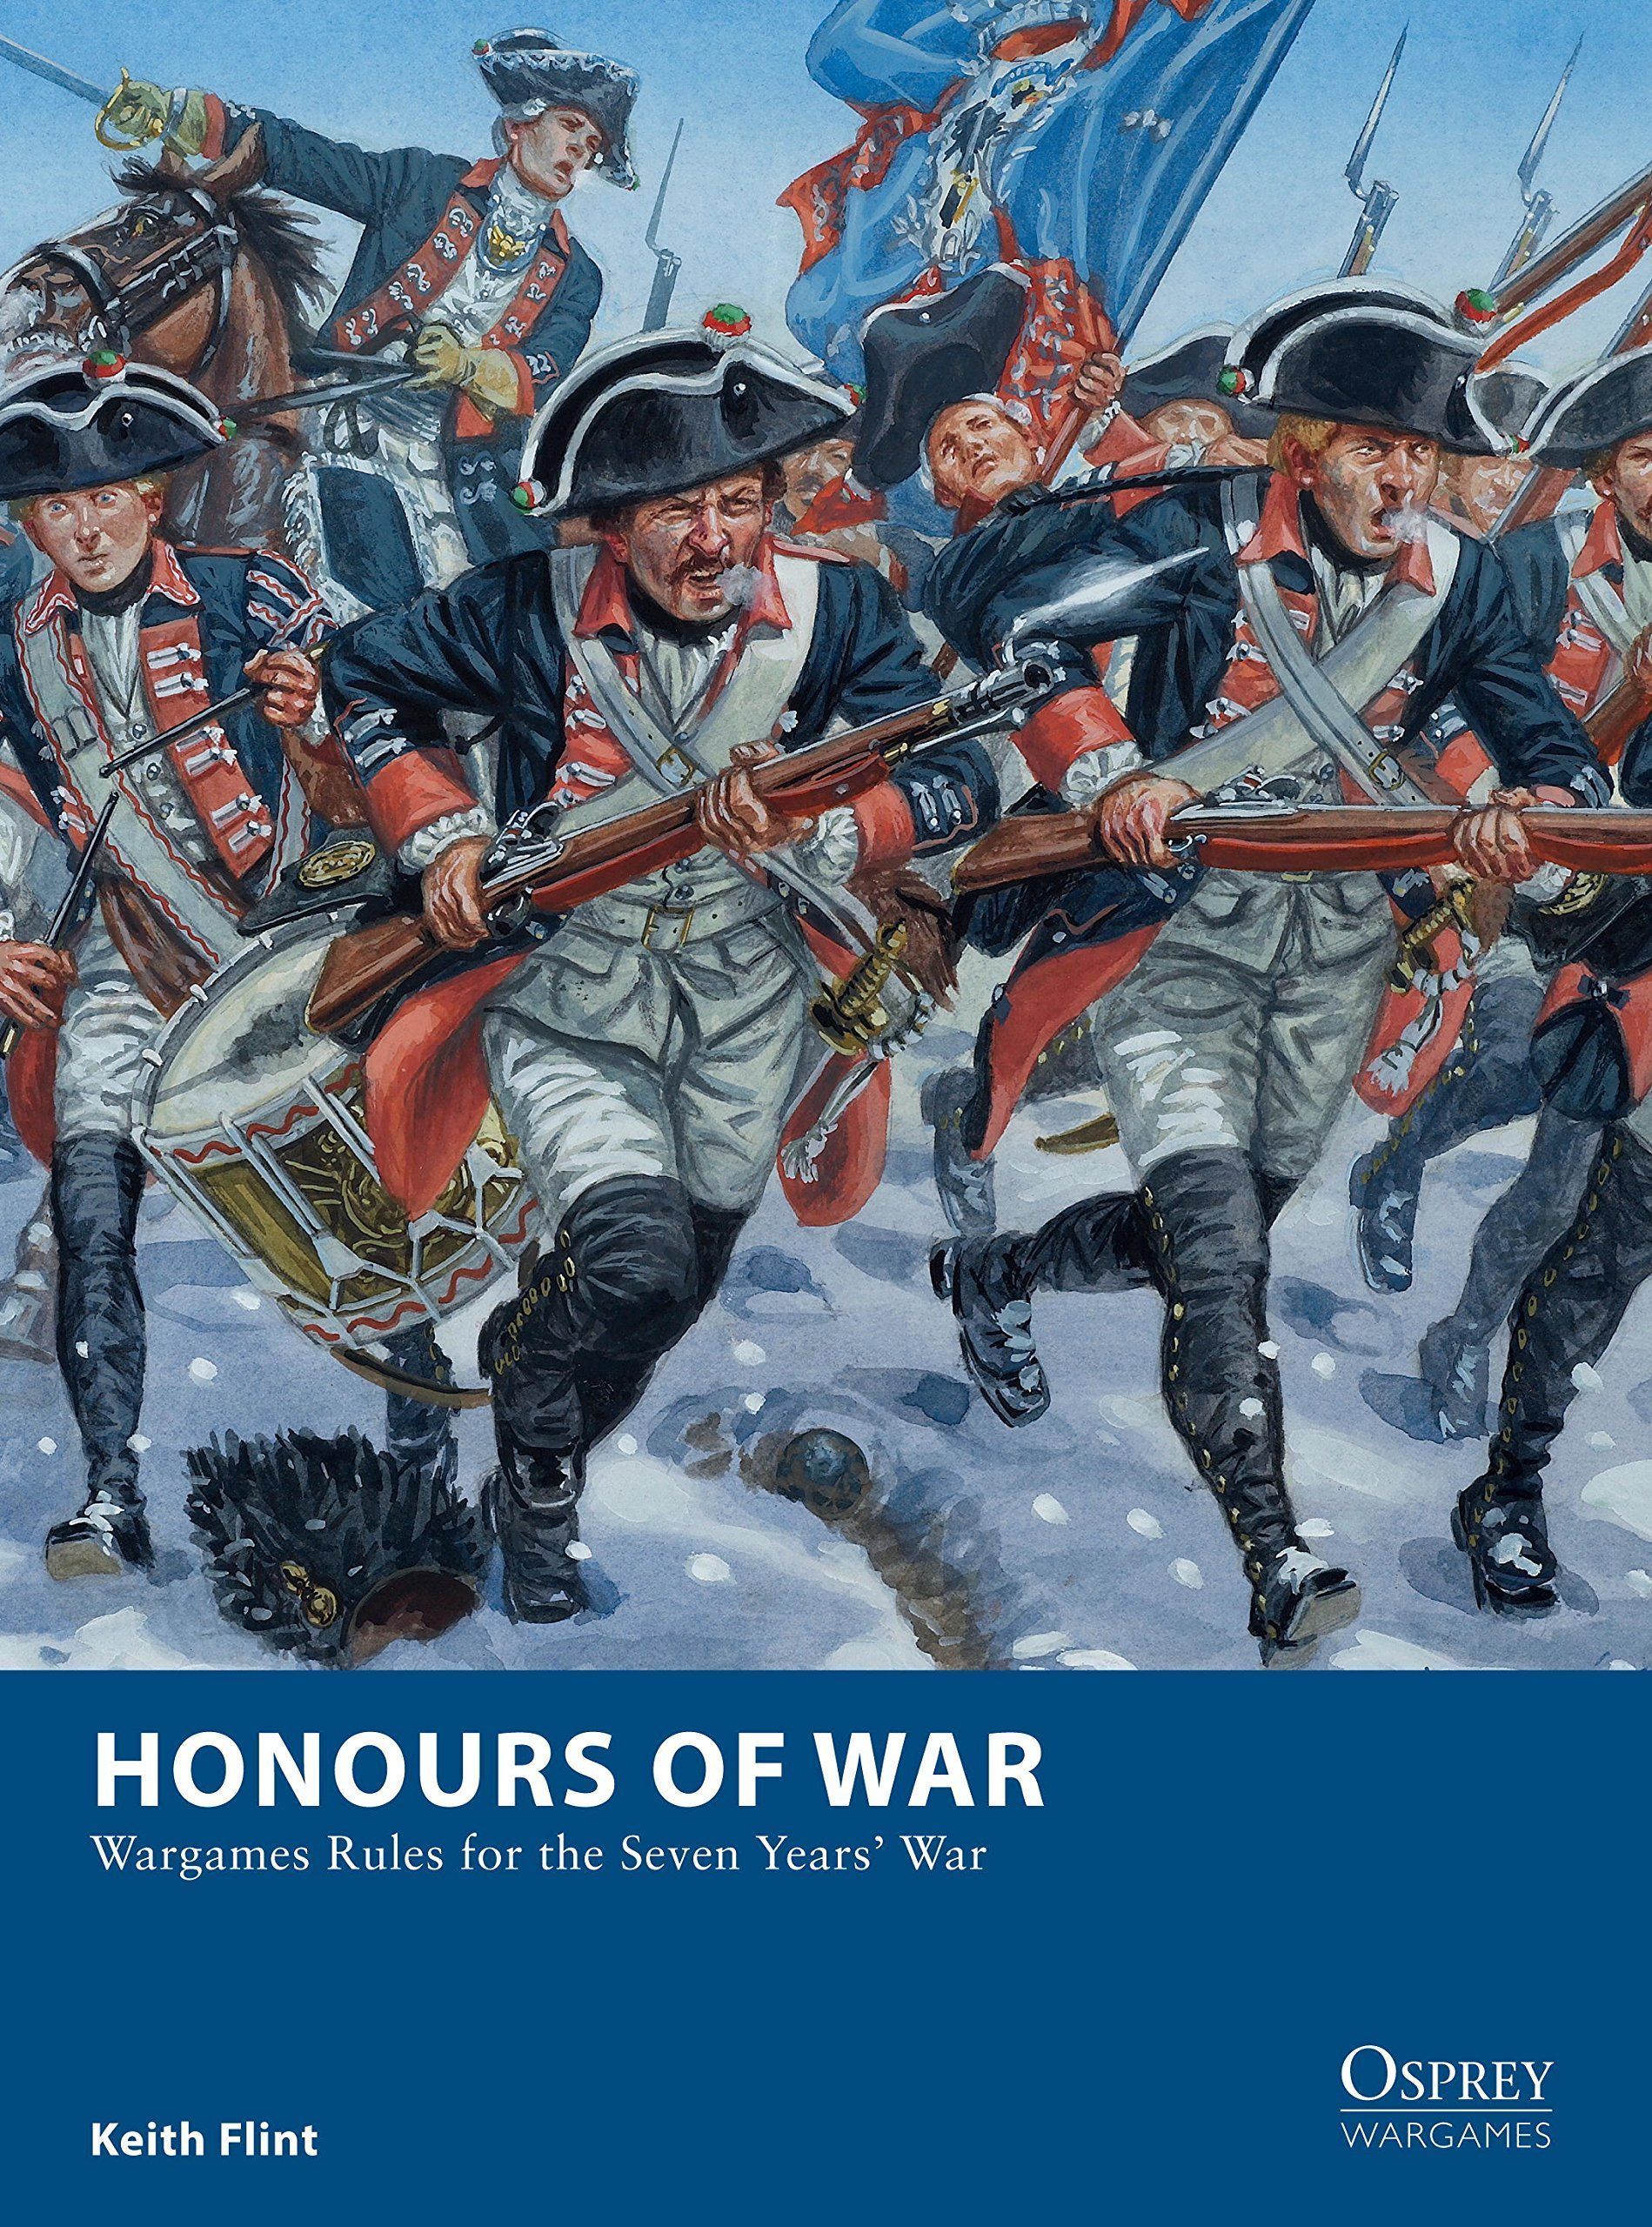 Honours of War: Wargames Rules for the Seven Years' War